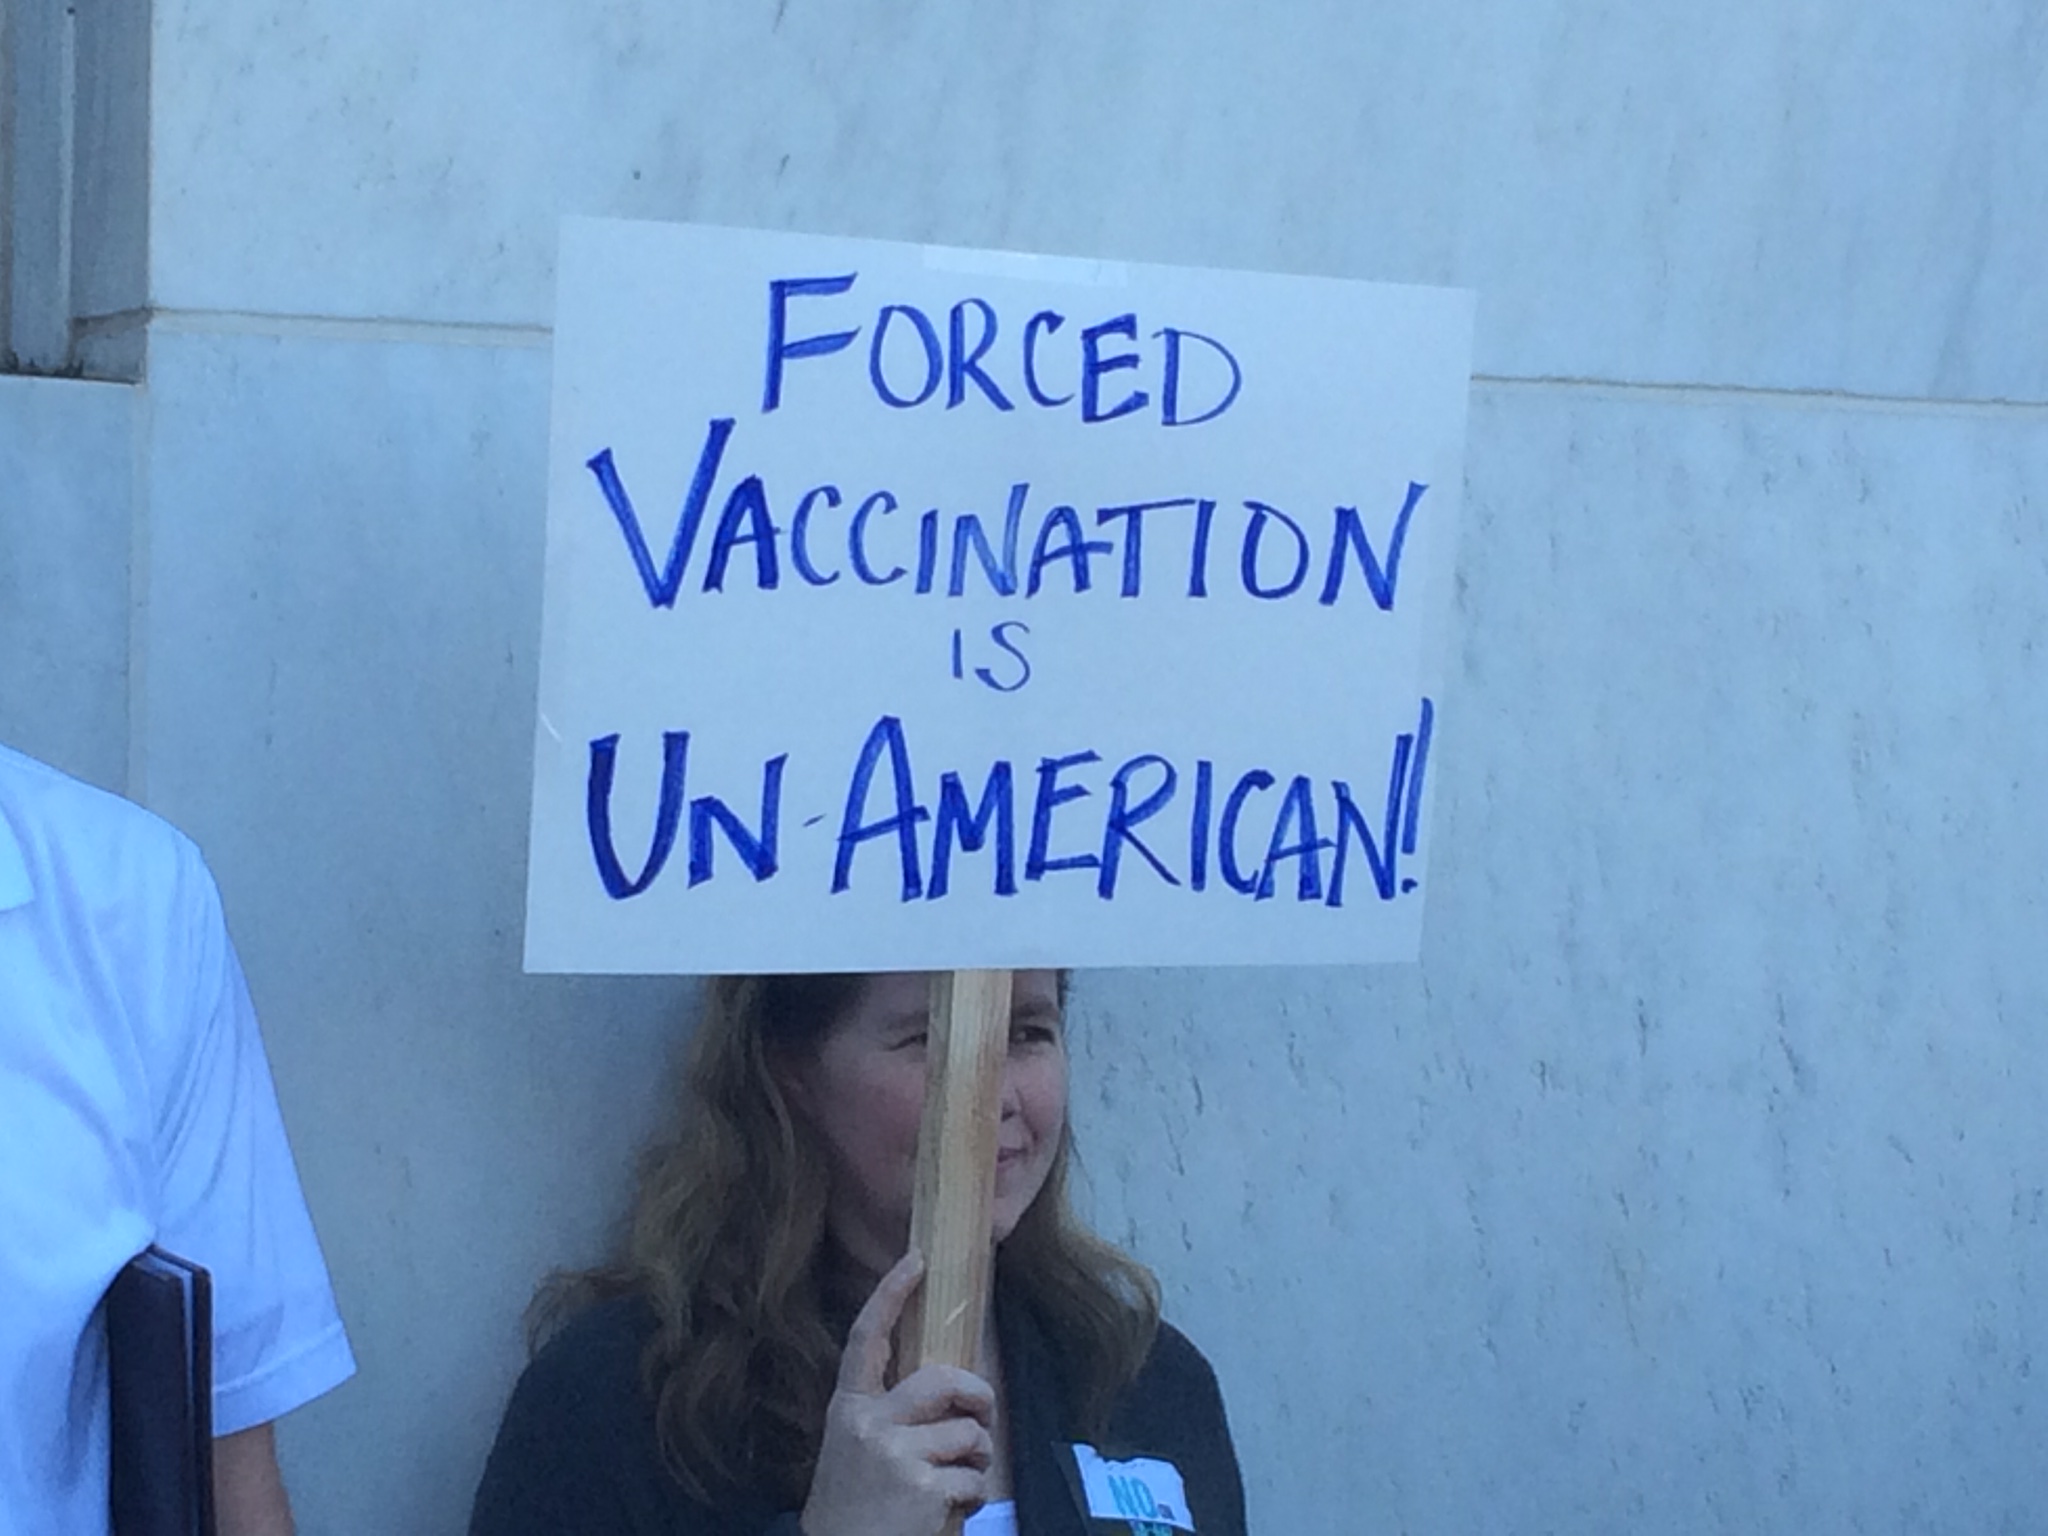 Forced vaccination is un-American. A sign at the March 9, 2015 rally in Salem